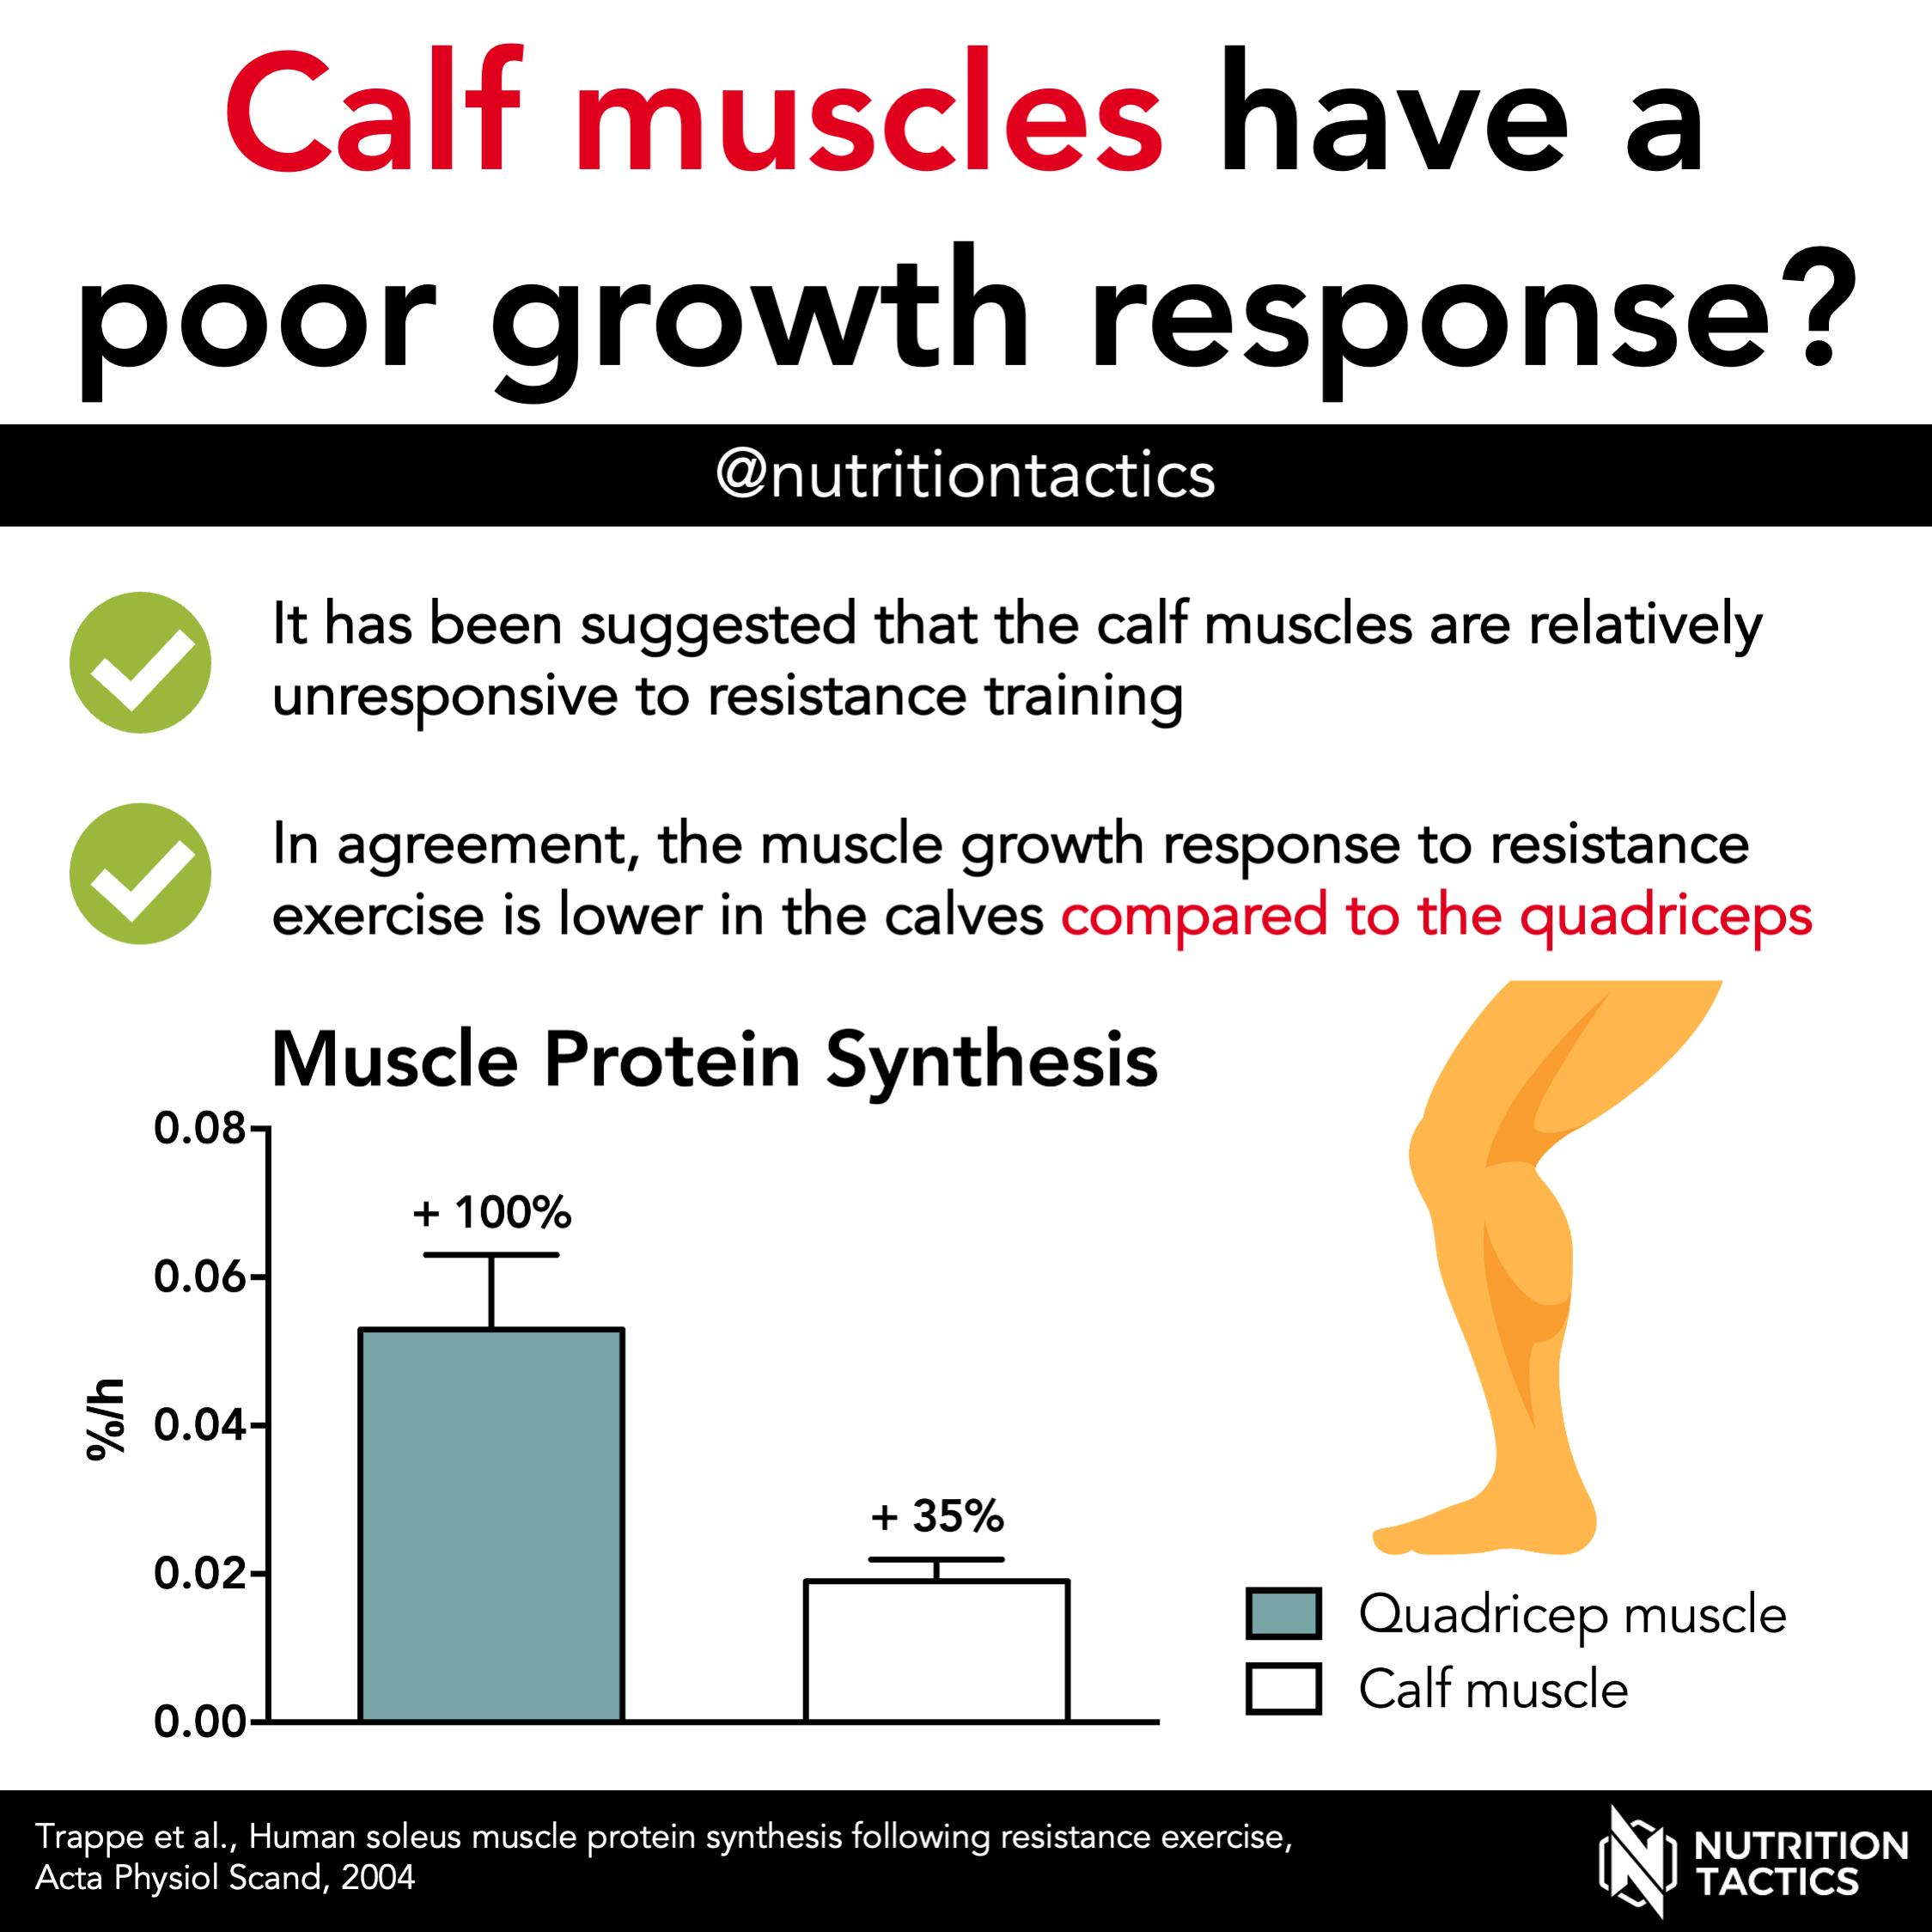 Calf muscles have a poor growth response?